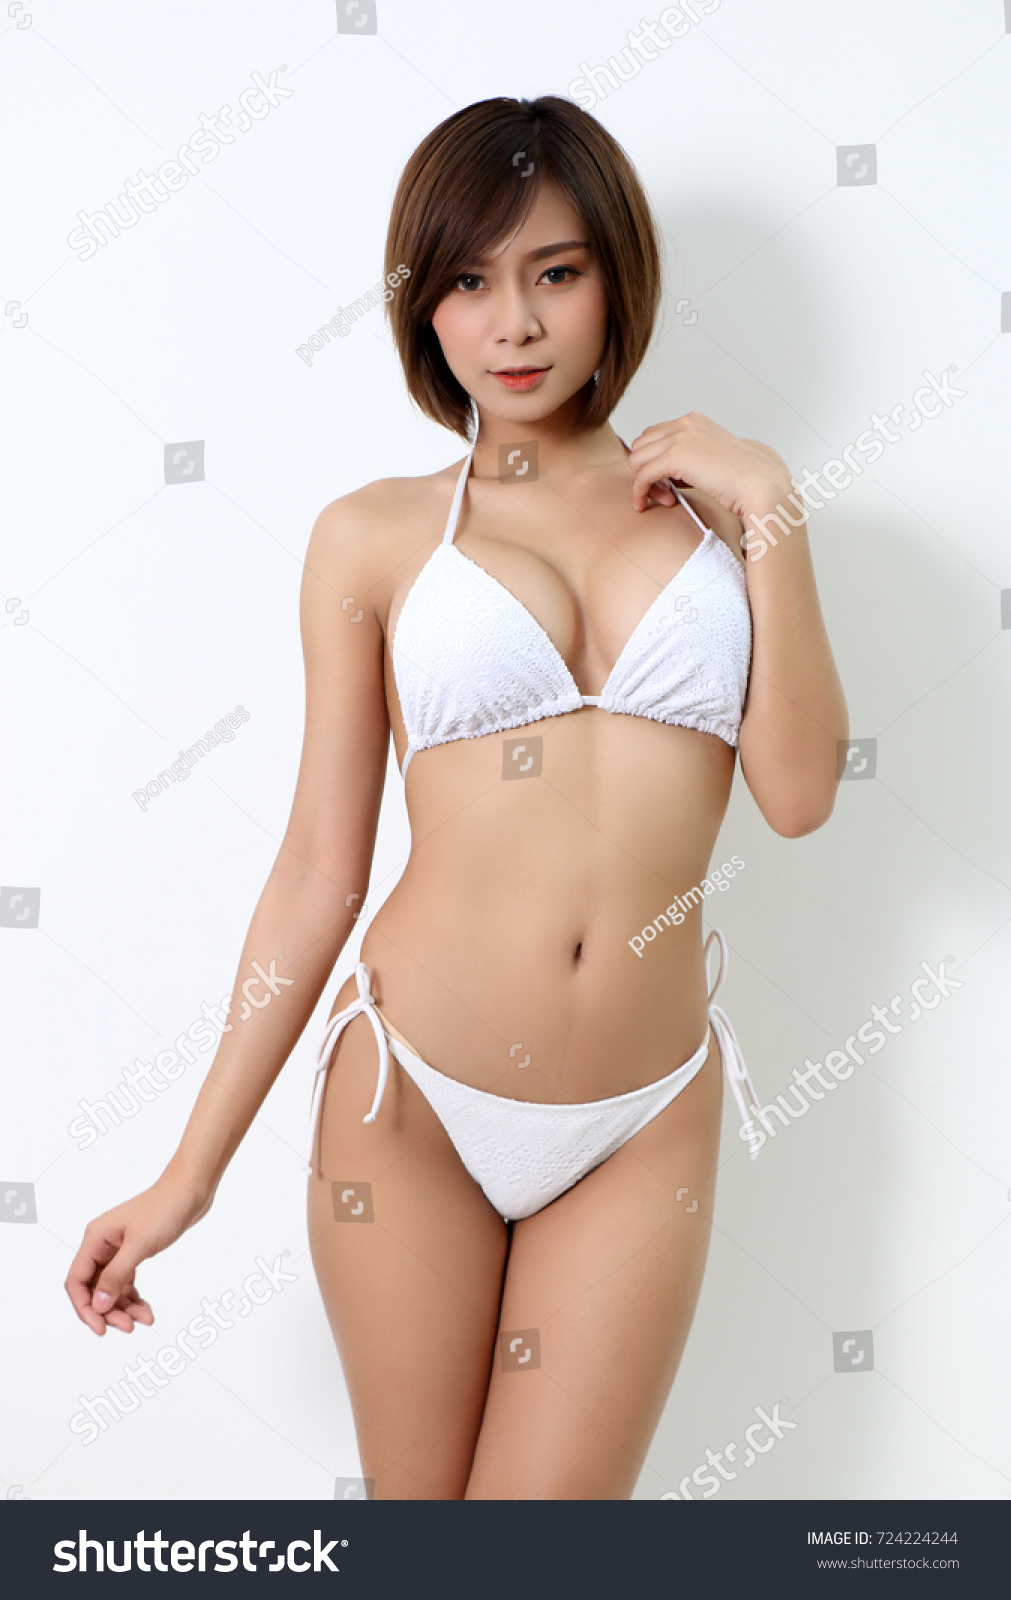 claire hirons recommends asian women in bikinis pic